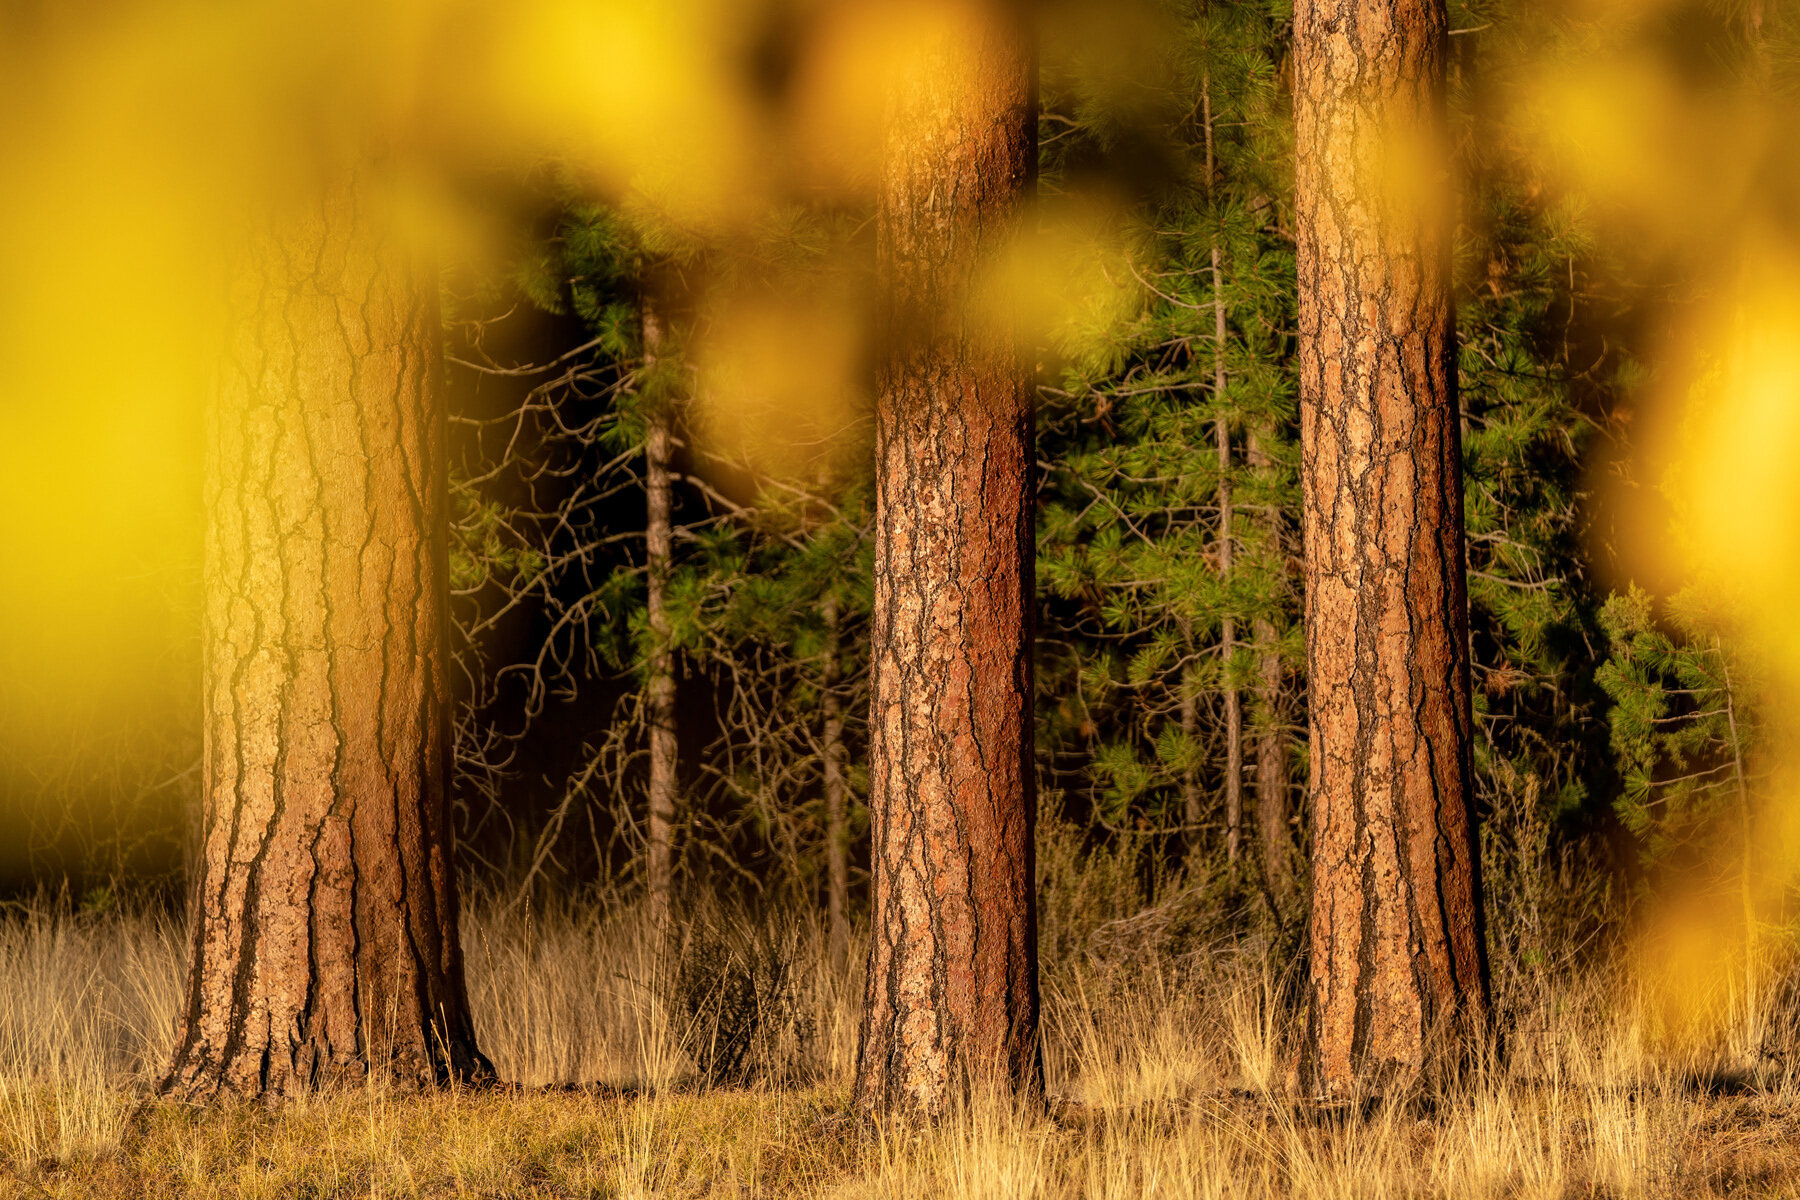 Wasim Muklashy Photography_Black Butte Ranch_Sisters_Bend_Oregon_Fall Color_133.jpg